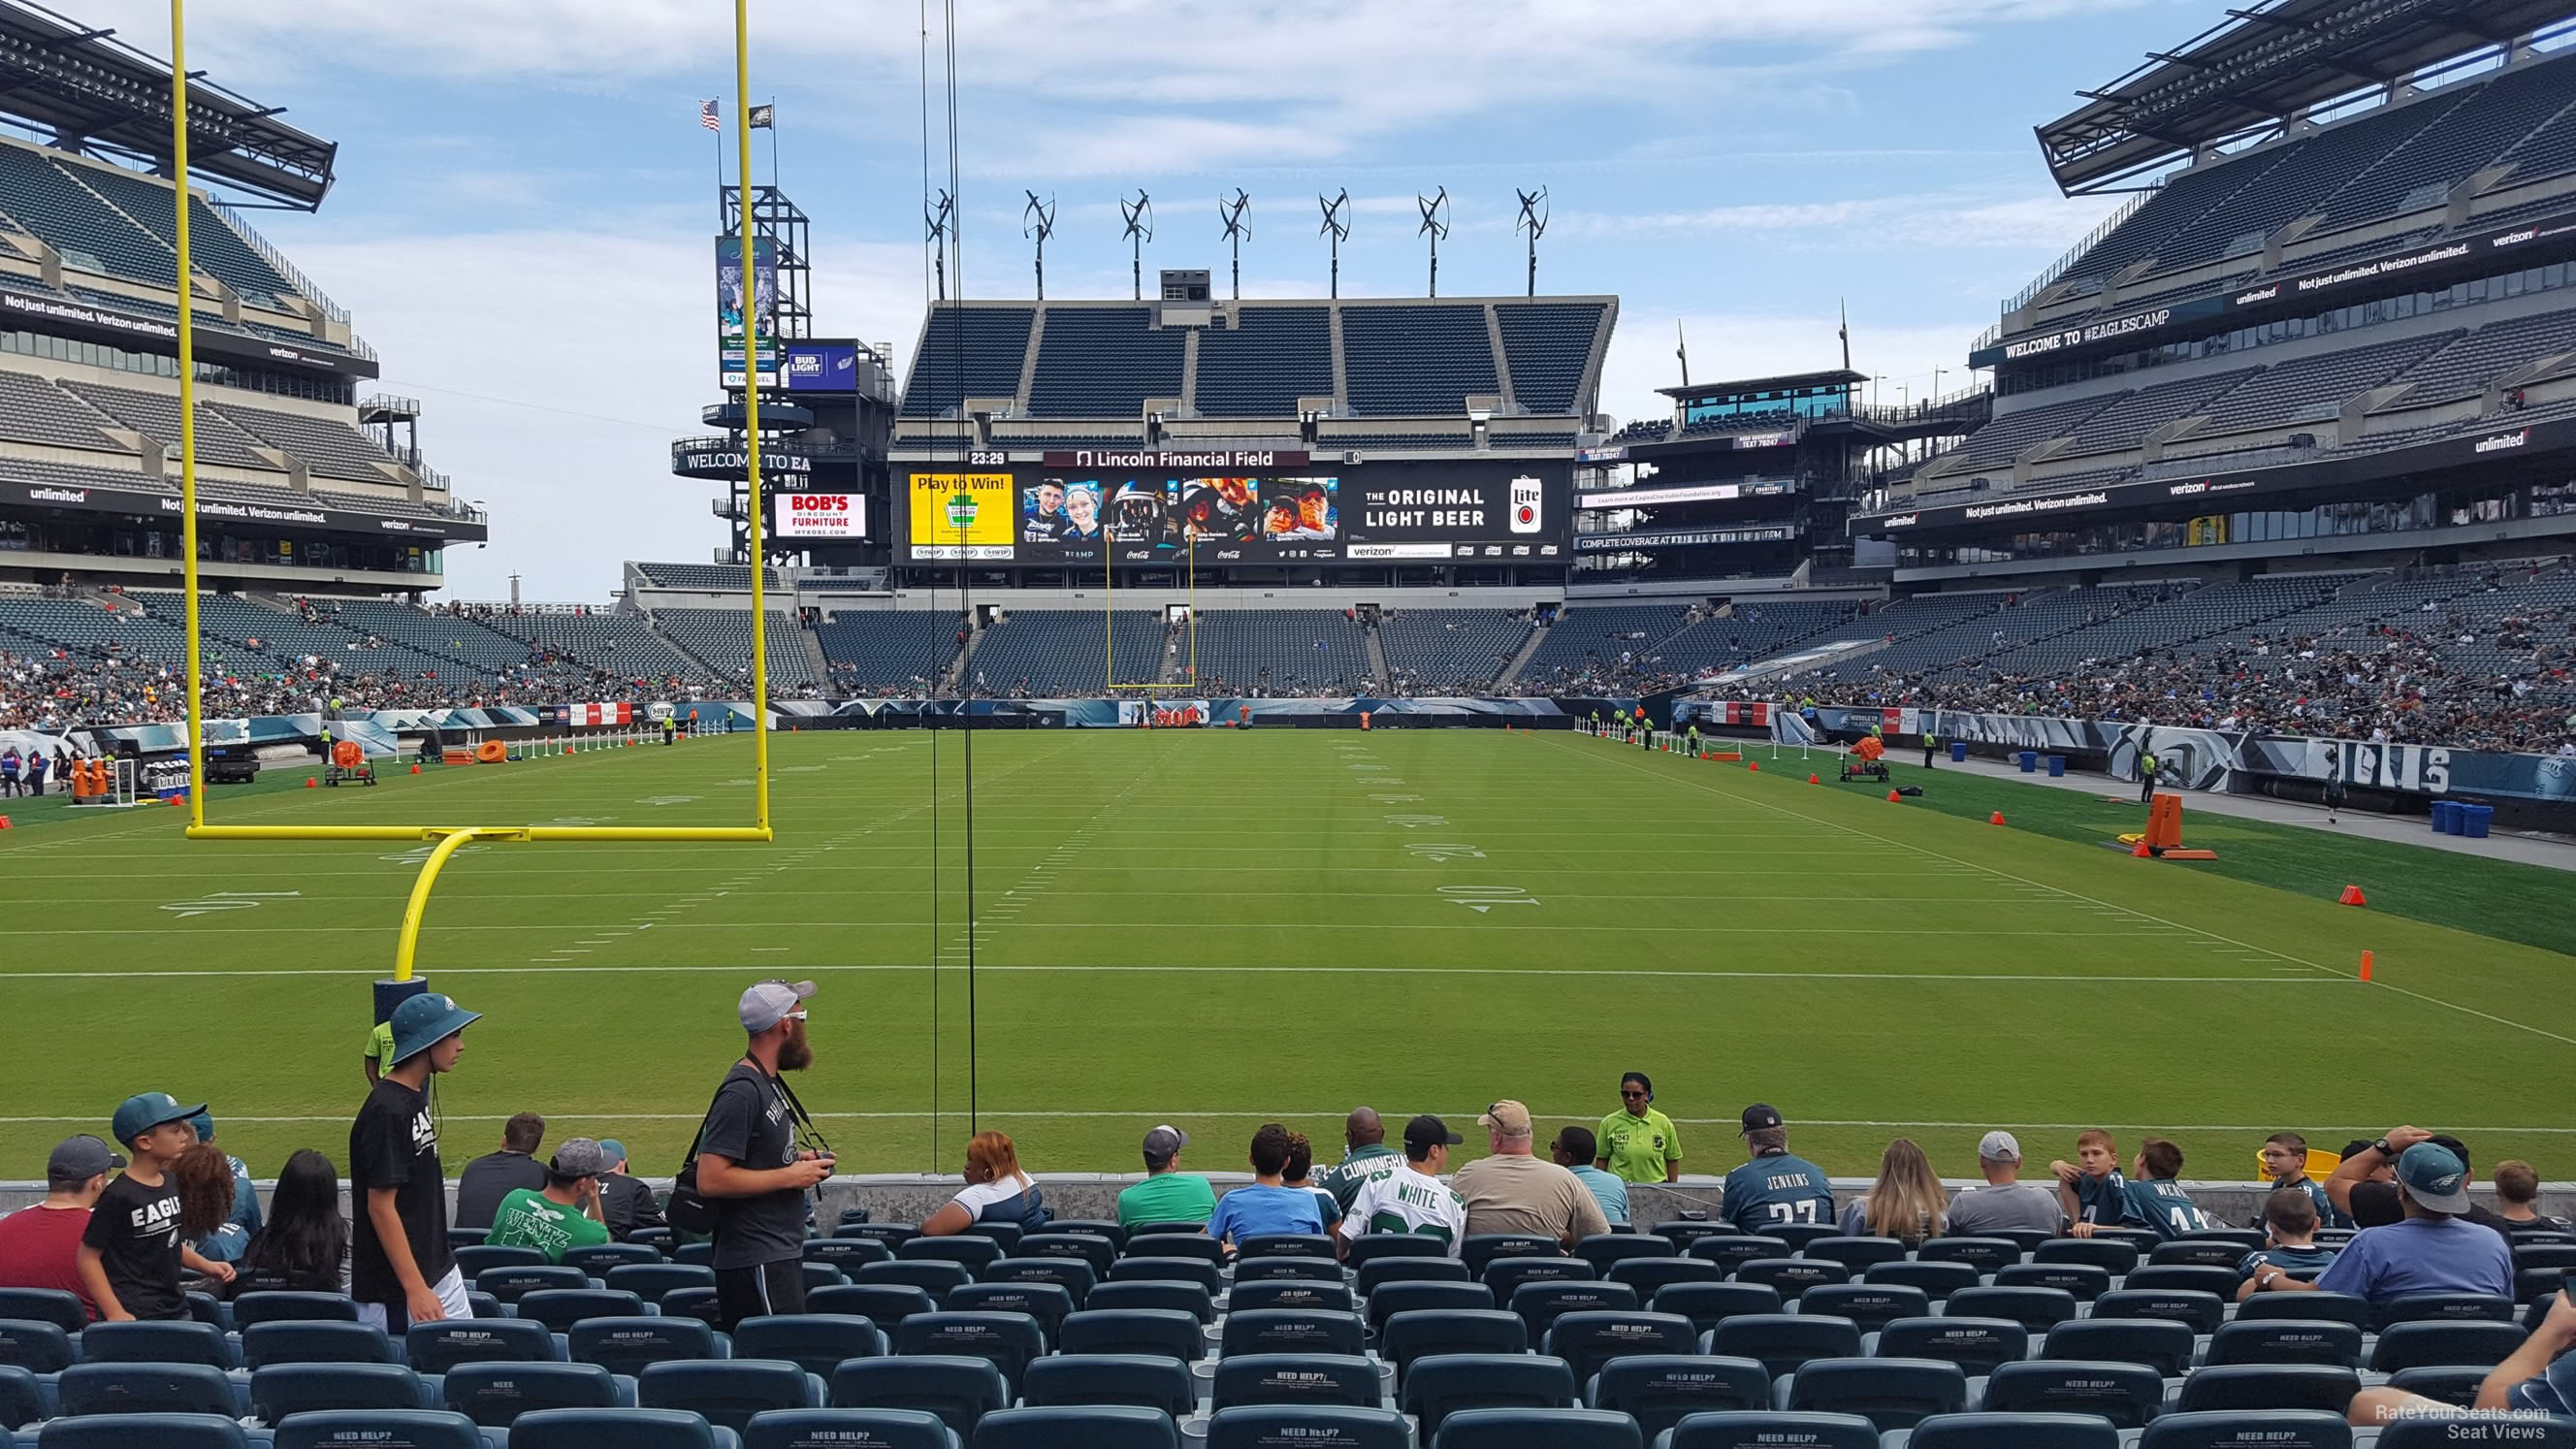 section 111, row 12 seat view  for football - lincoln financial field